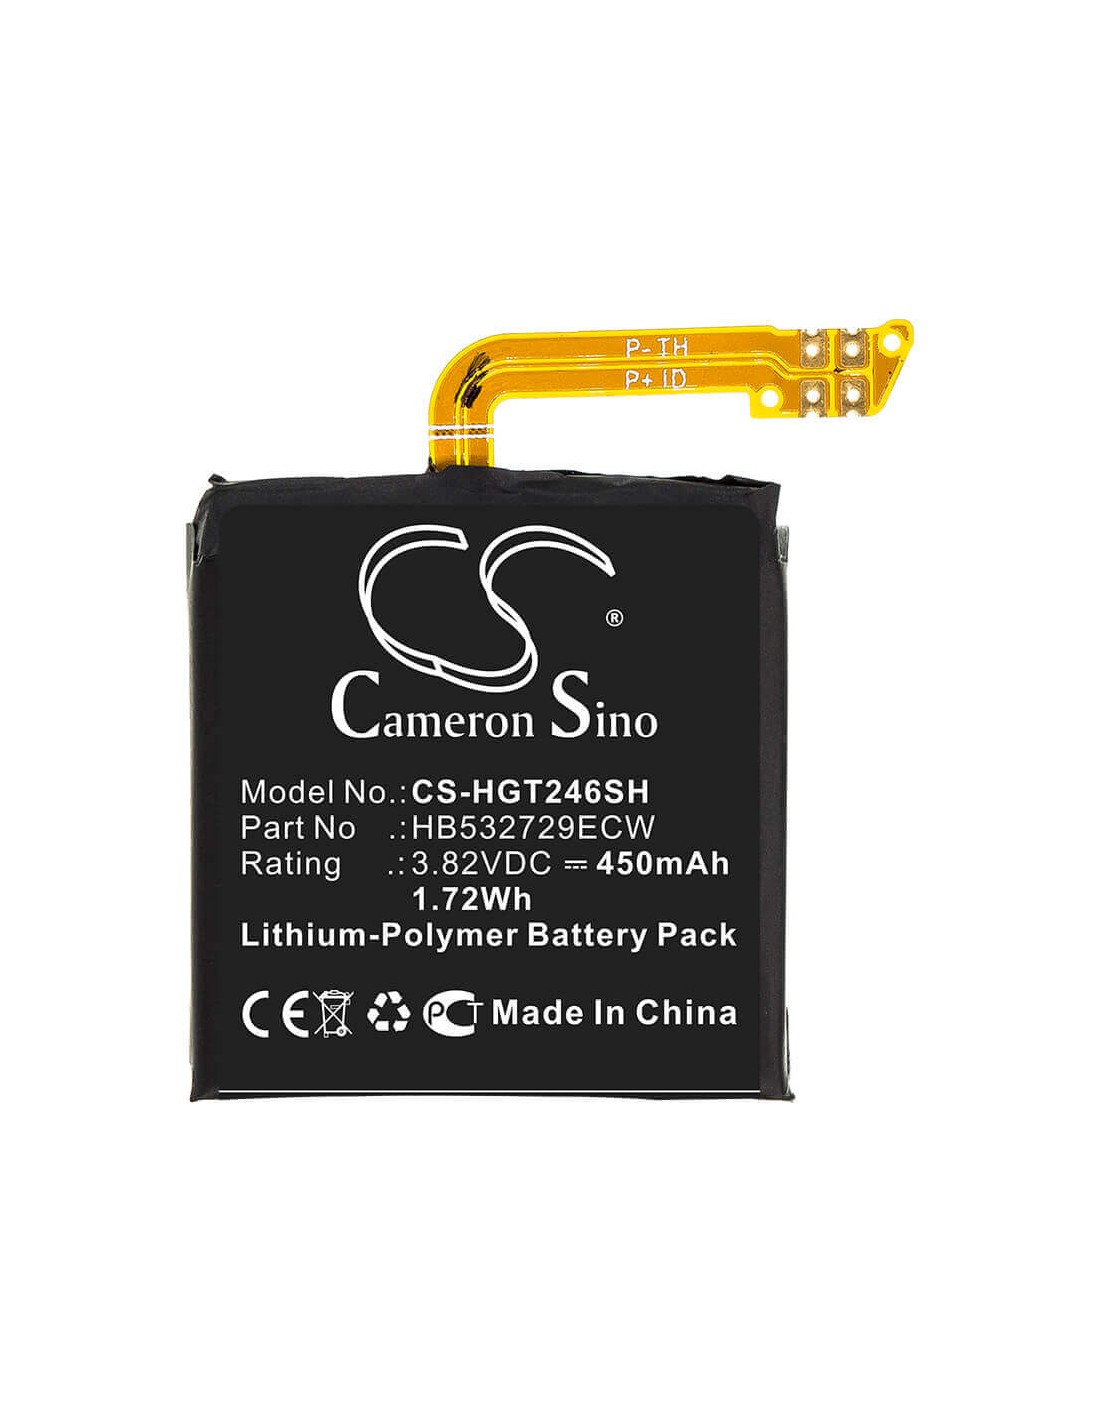 Battery for Huawei, Gt2 46mm 3.82V, 450mAh - 1.72Wh